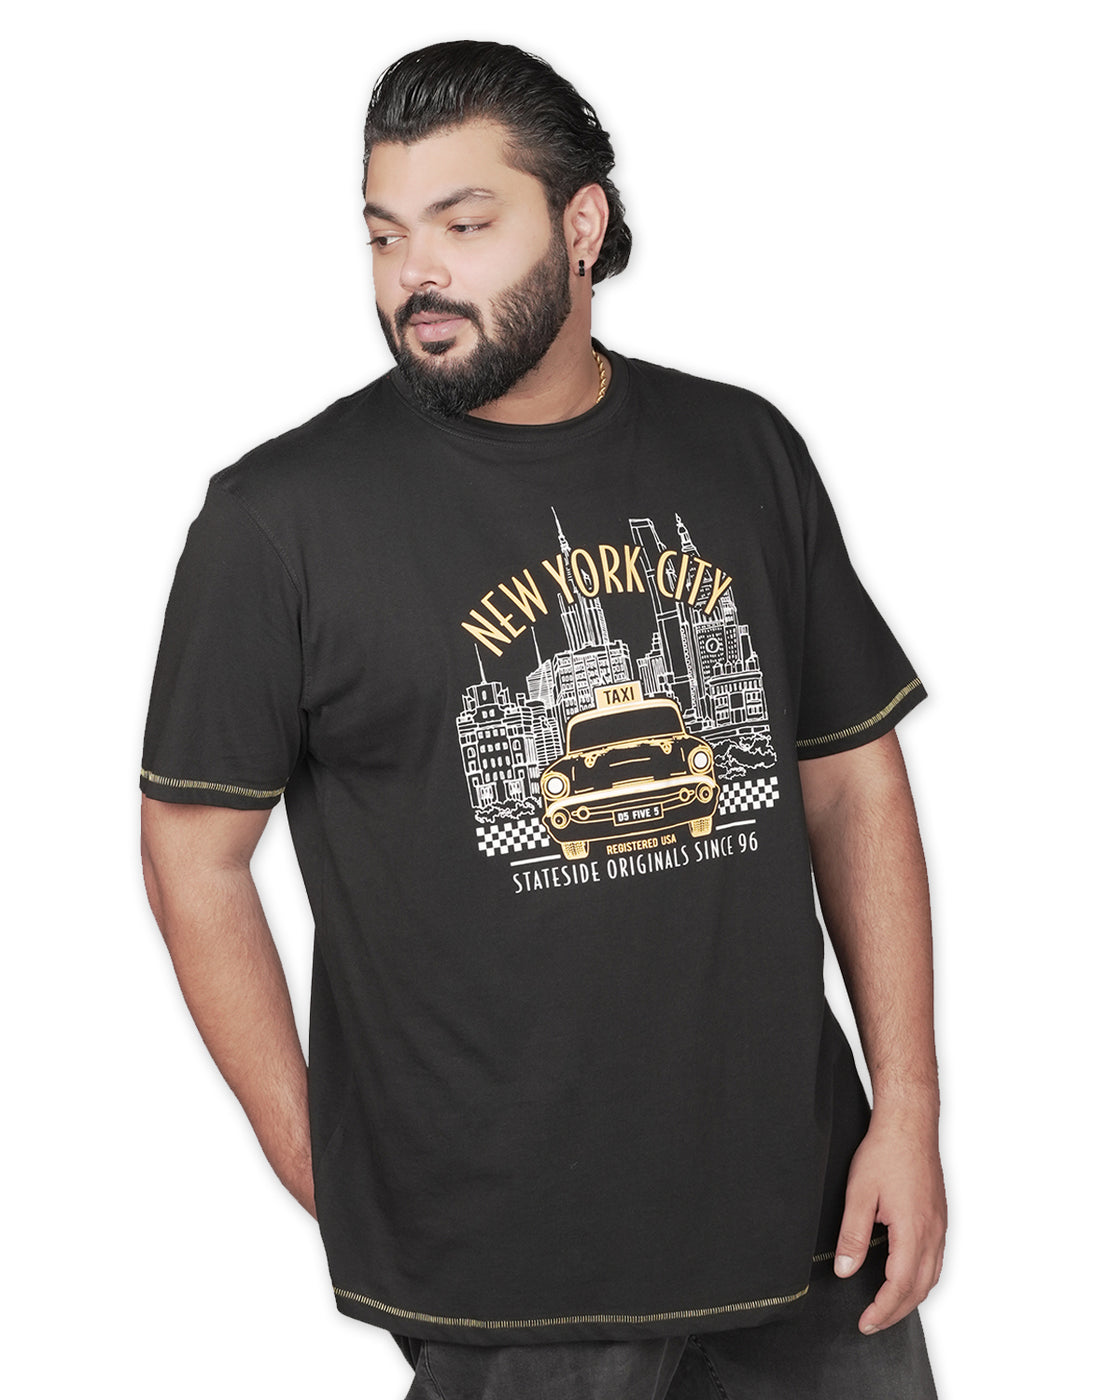 New York Taxi Graphic Print T-Shirt by D555